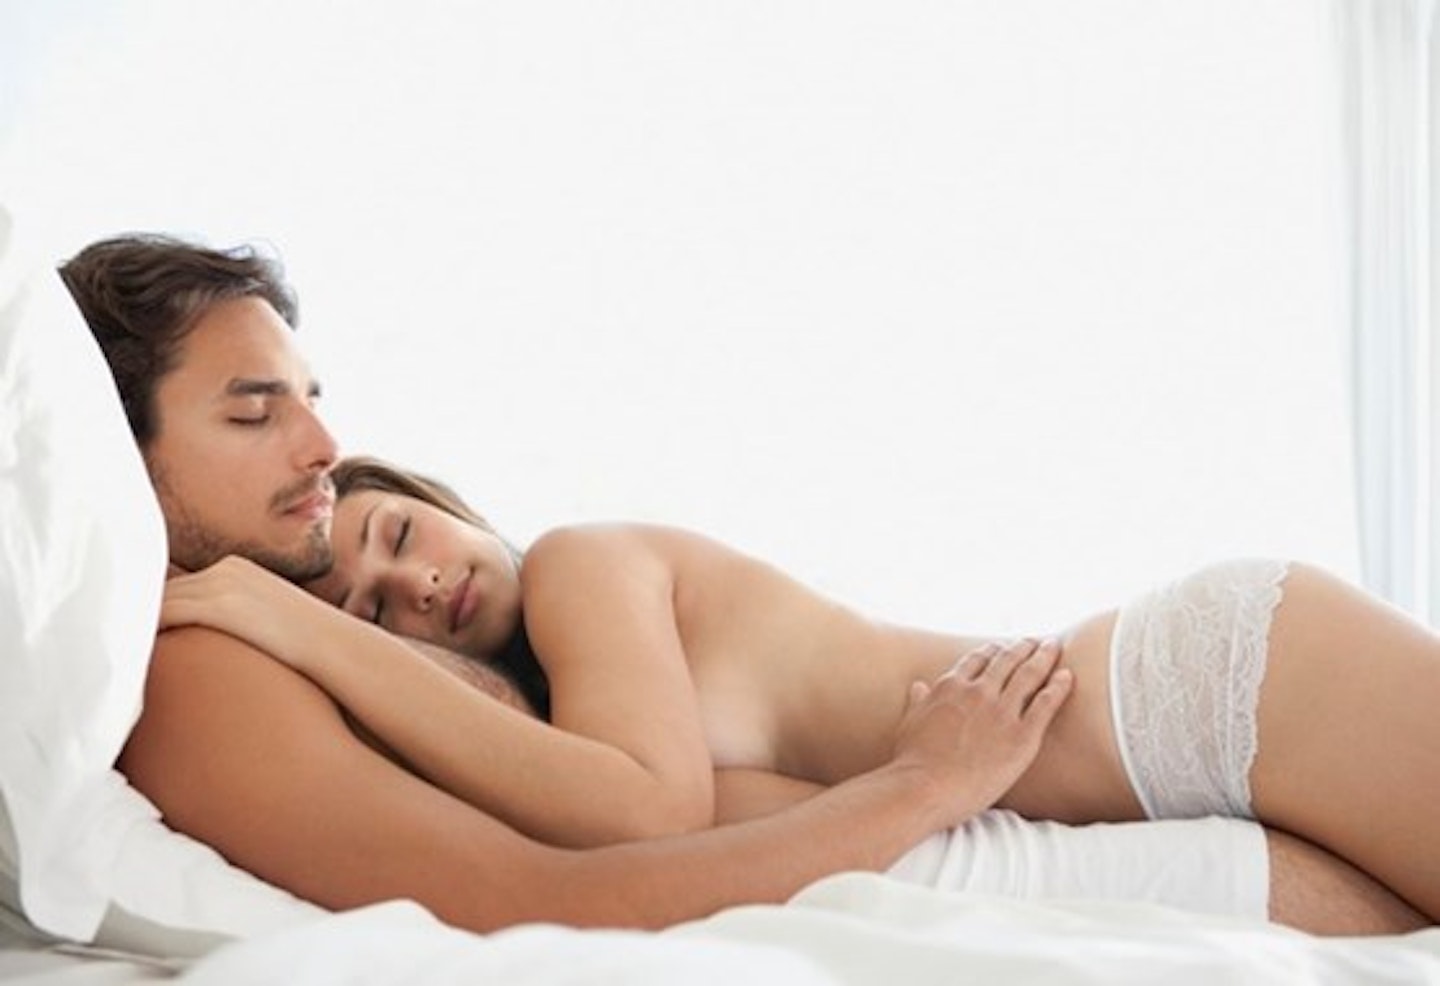 An image of a man and woman lying down